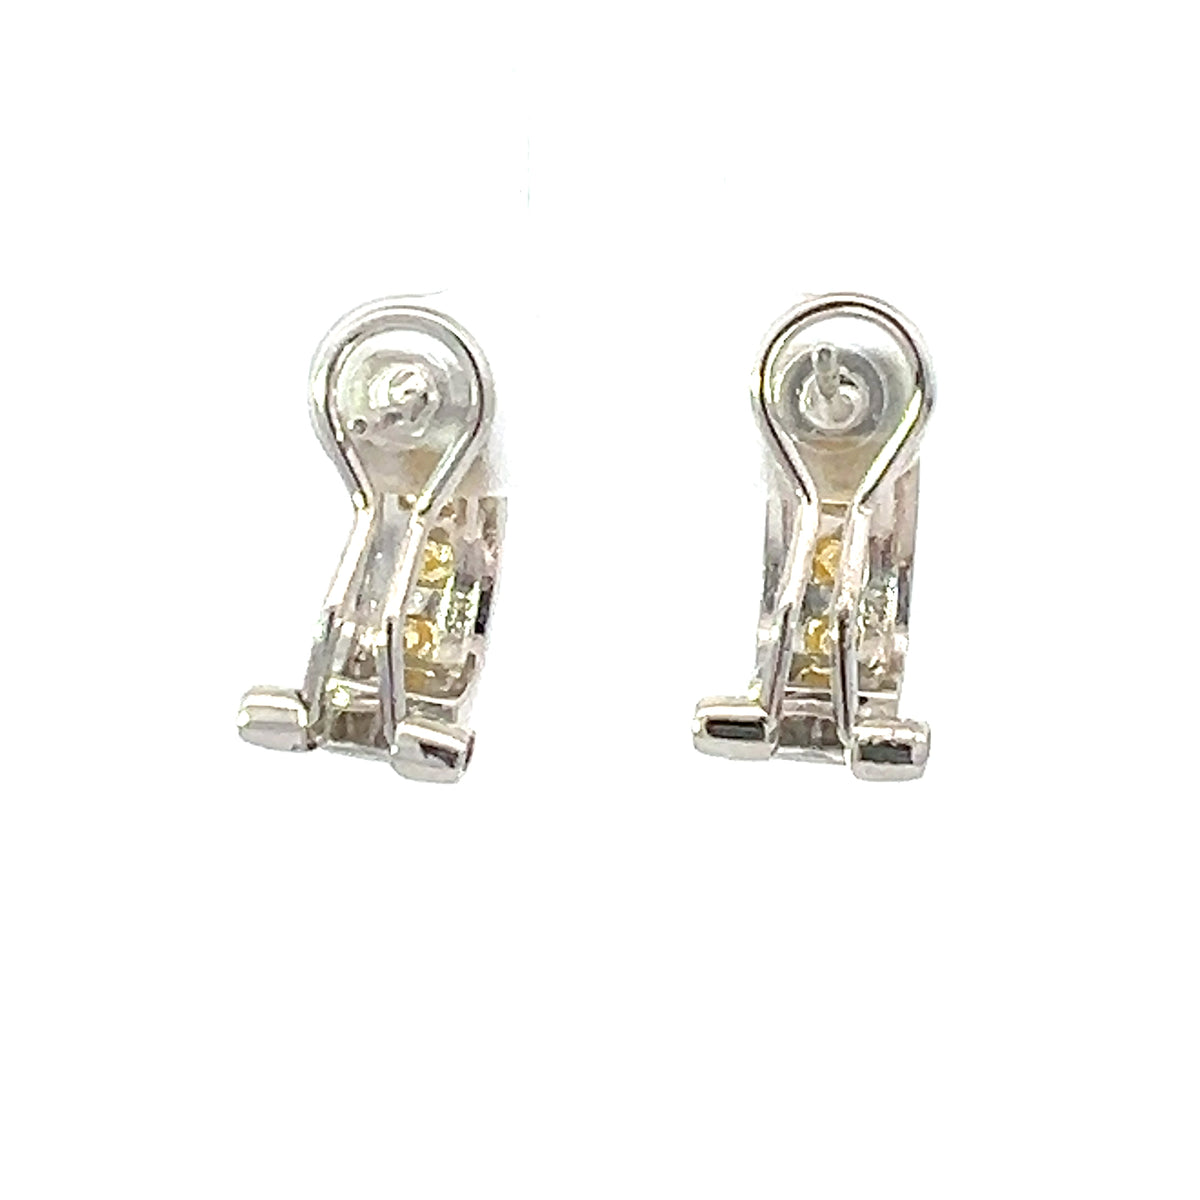 925 Silver Earrings with Princess cut Yellow Cubic Zirconia